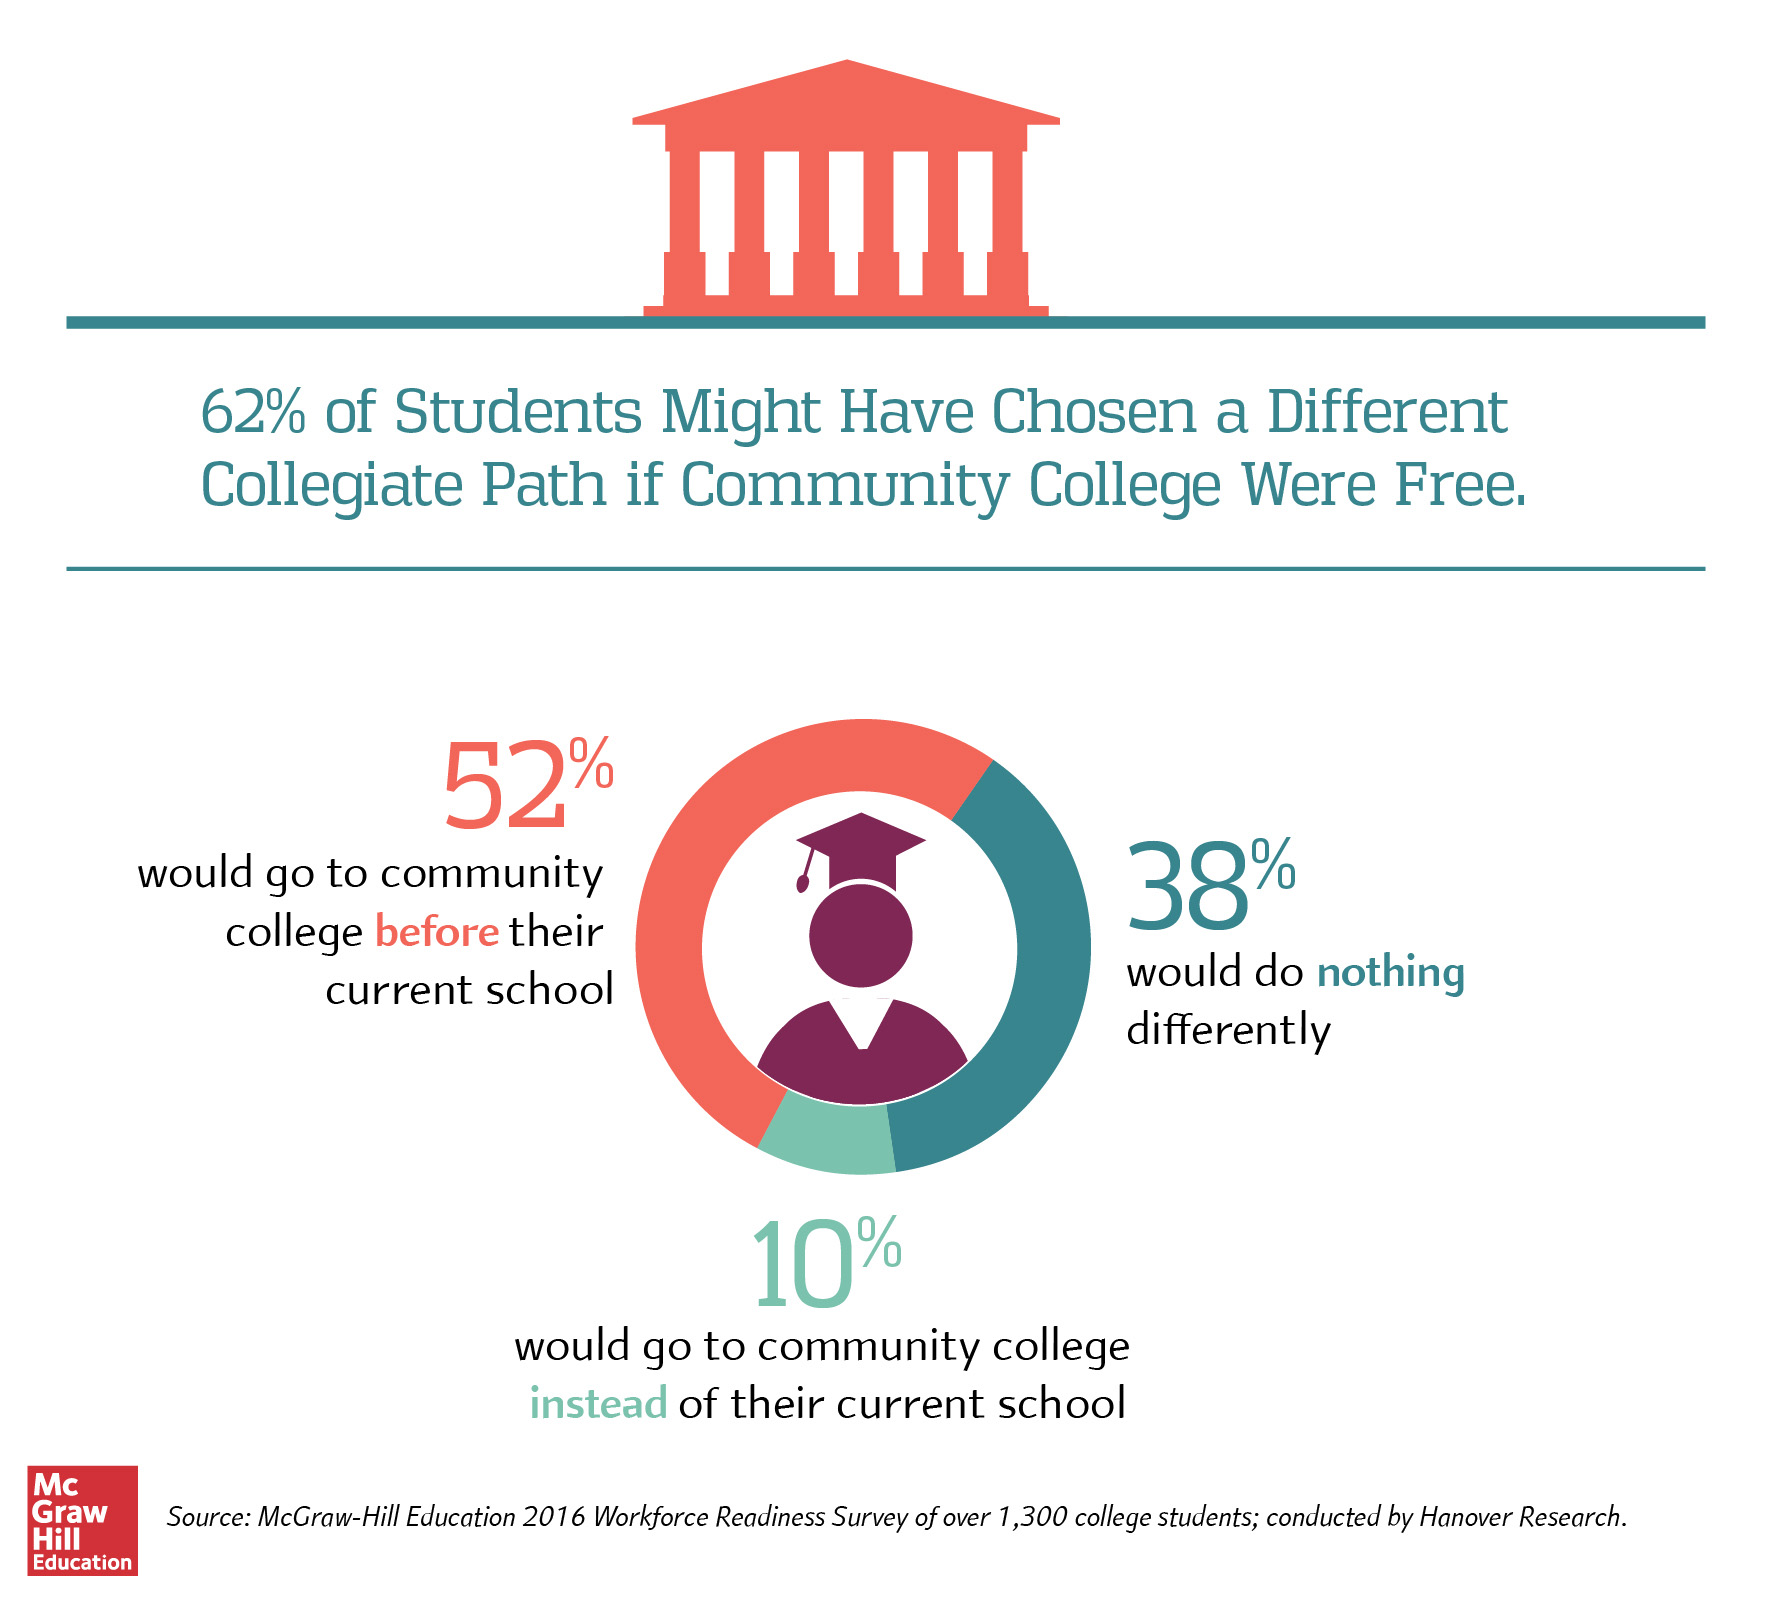 What if Community College Was Free?